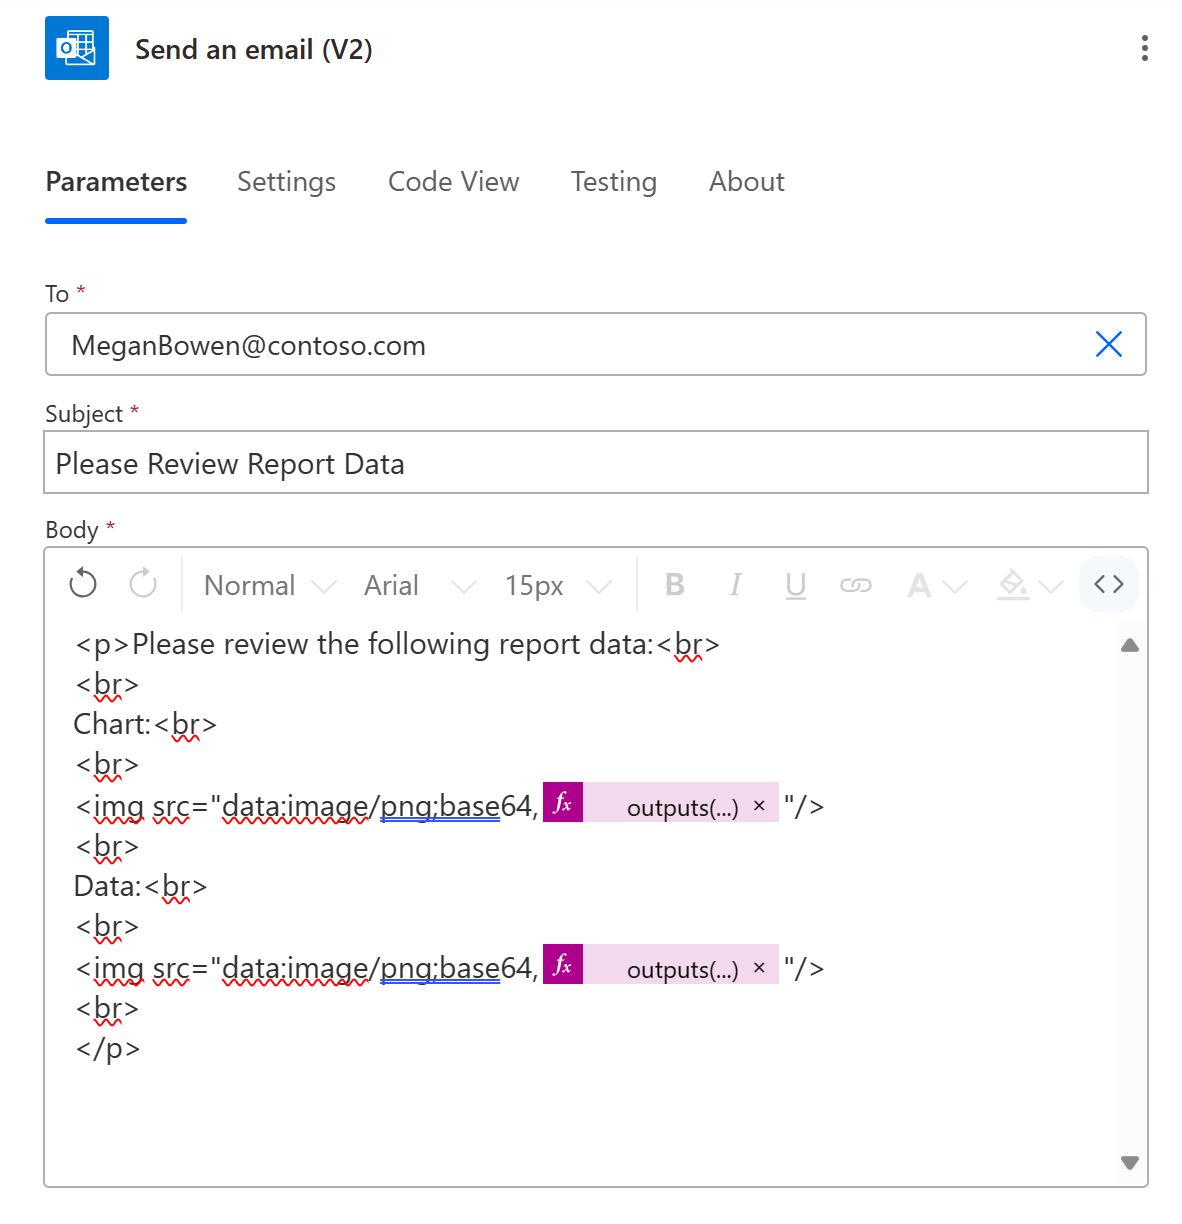 The completed Office 365 Outlook connector in Power Automate.